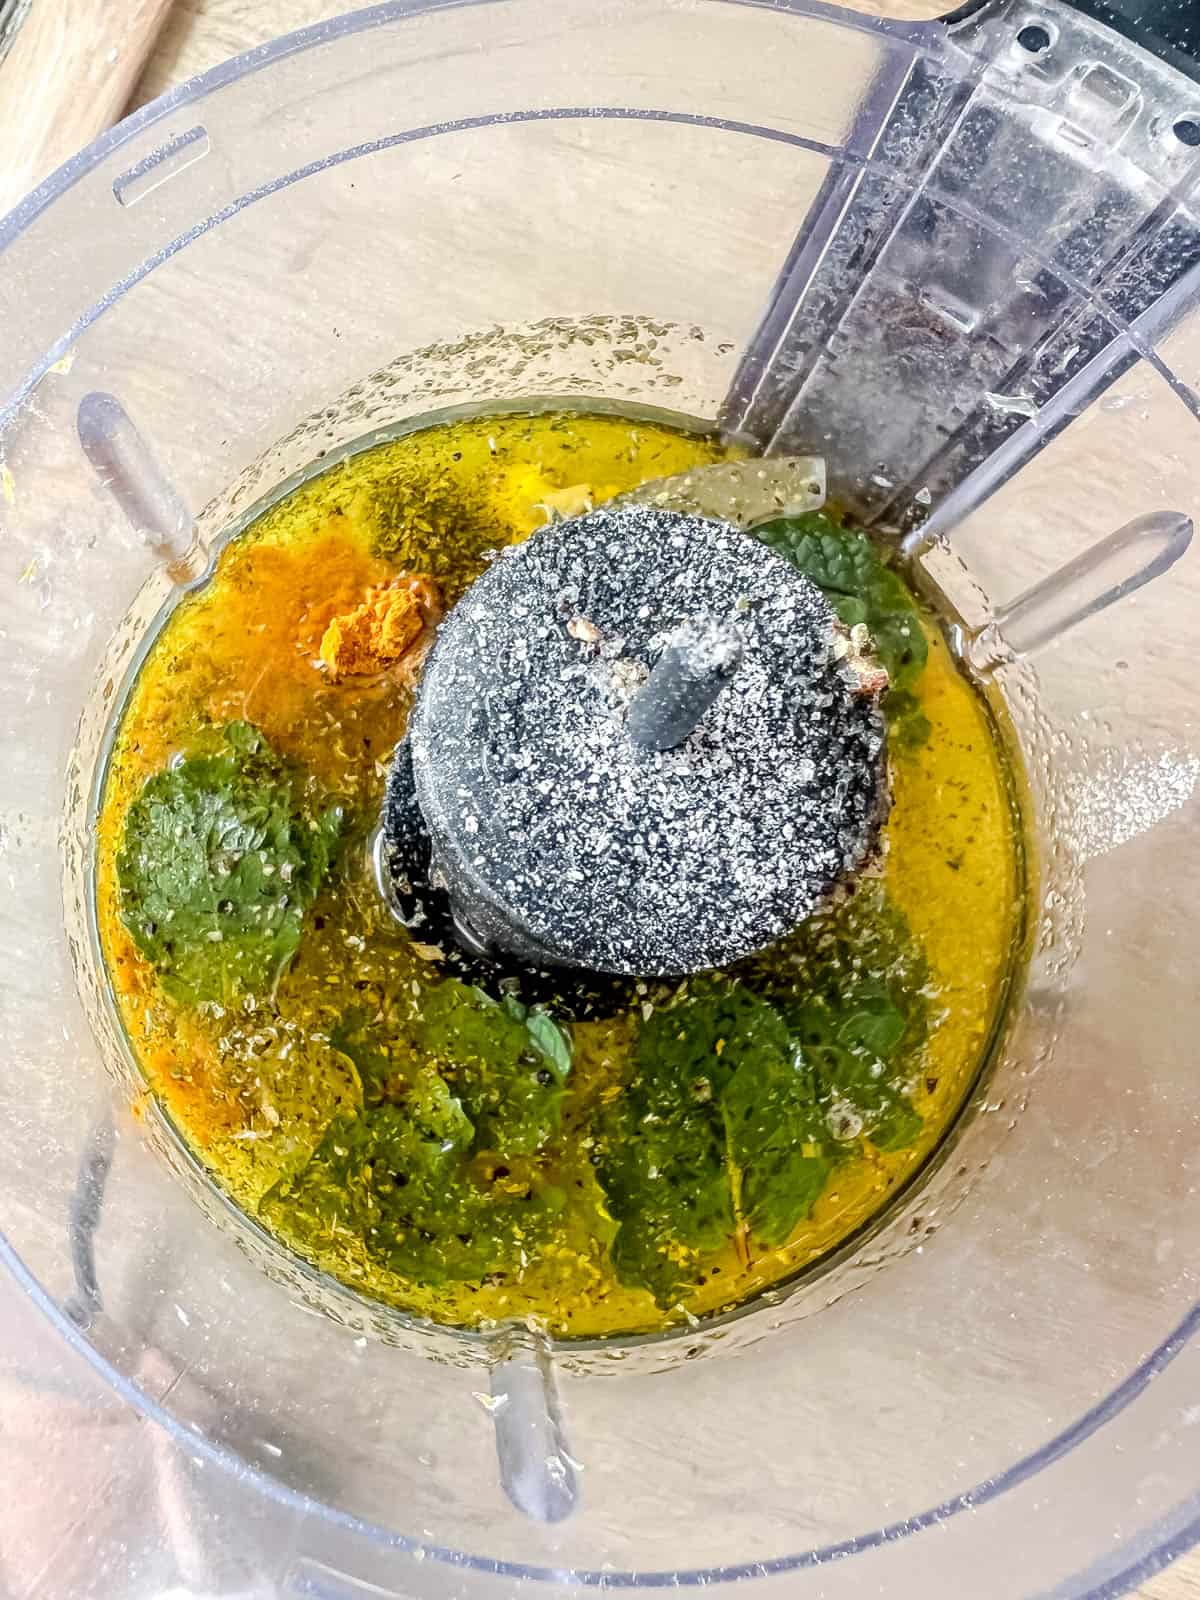 Ingredients in a food processor to make lemon mint dressing with turmeric powder.